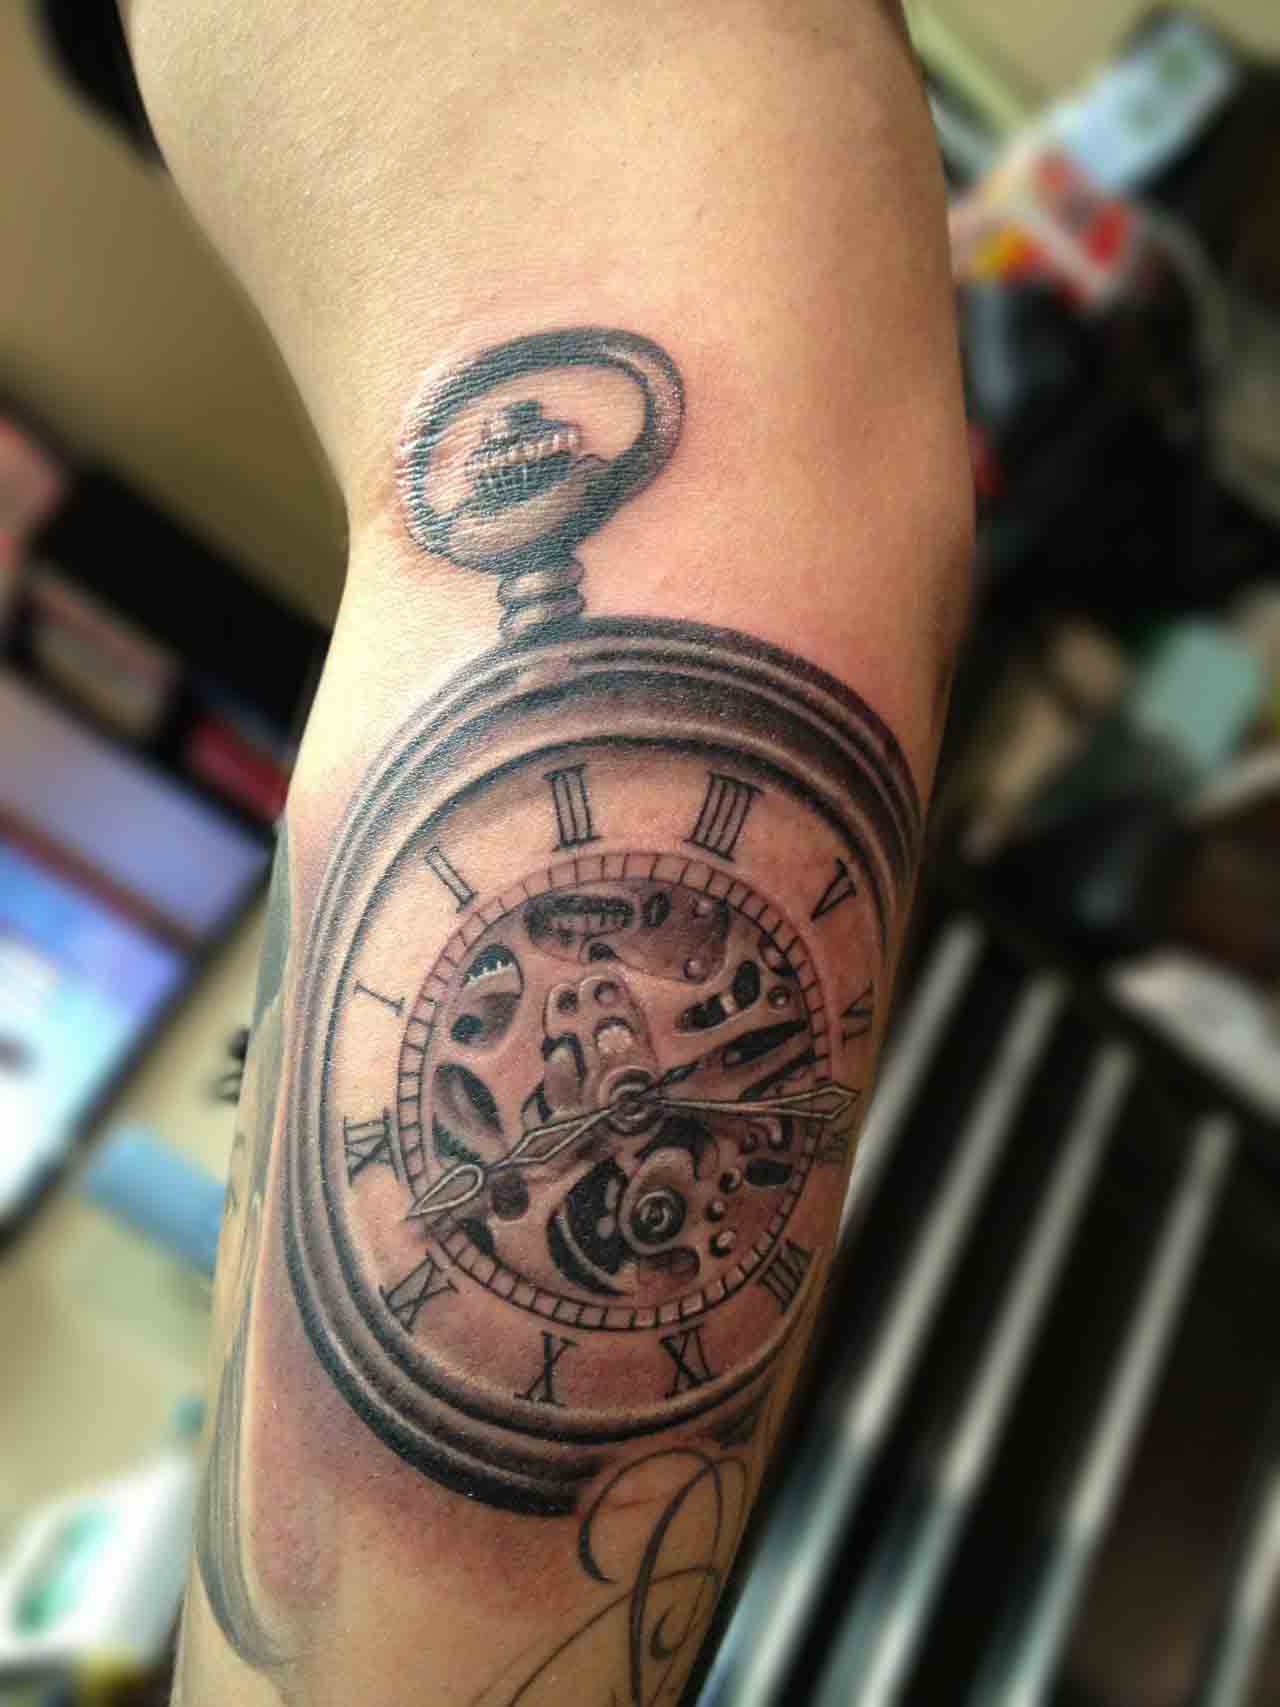 Black And Grey Pocket Watch Tattoo On Forearm